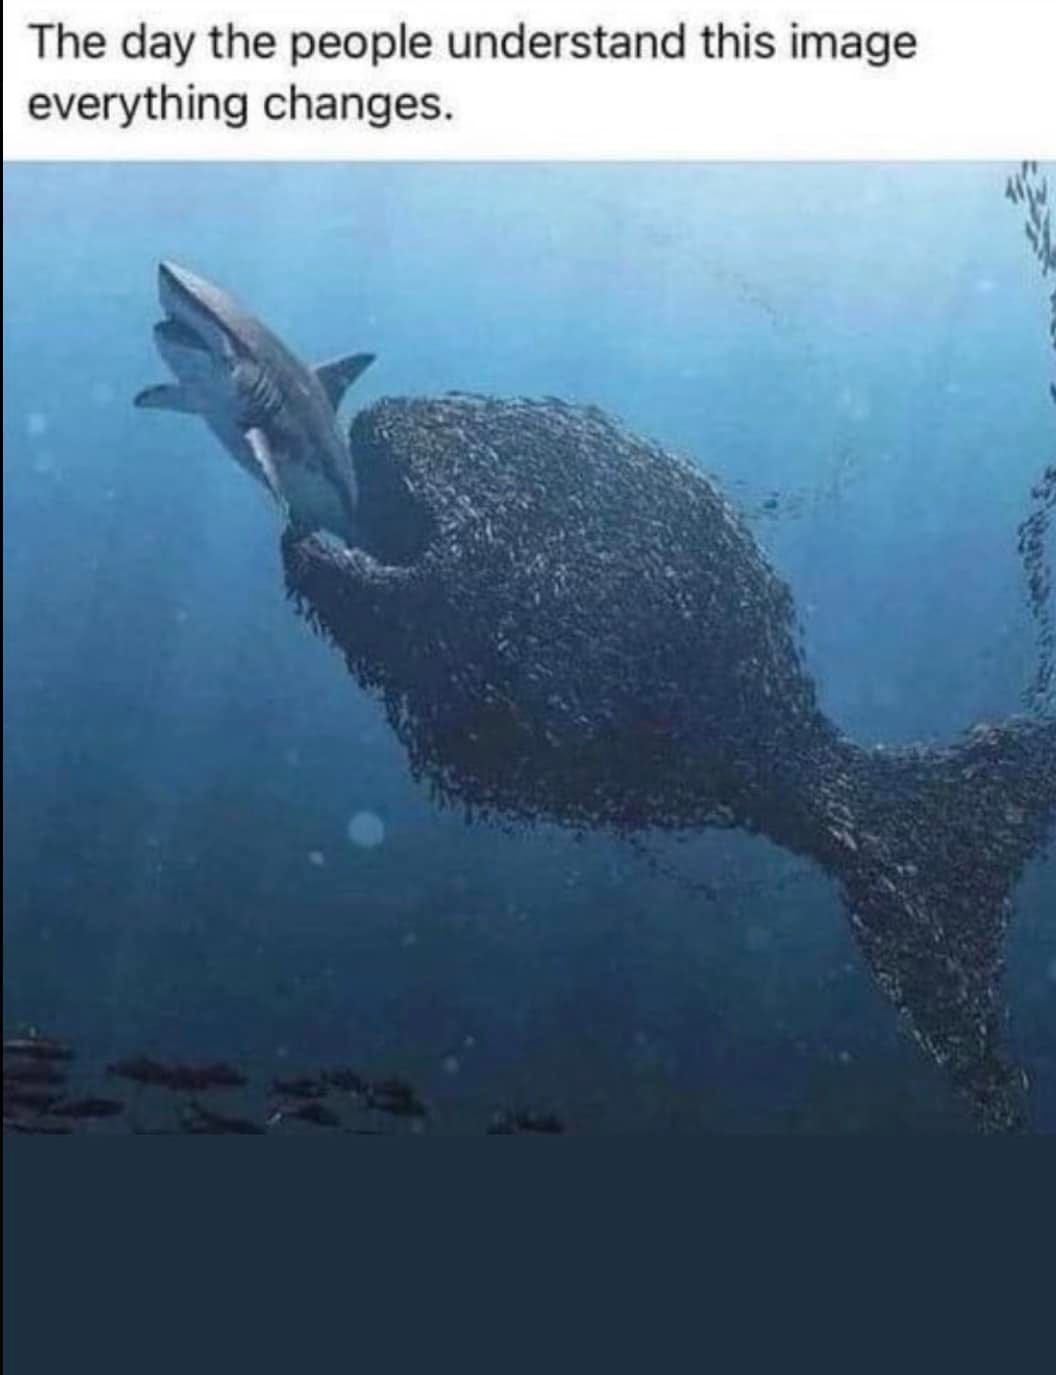 May be an image of swimming, whale shark and text that says 'The day the people understand this image everything changes.'